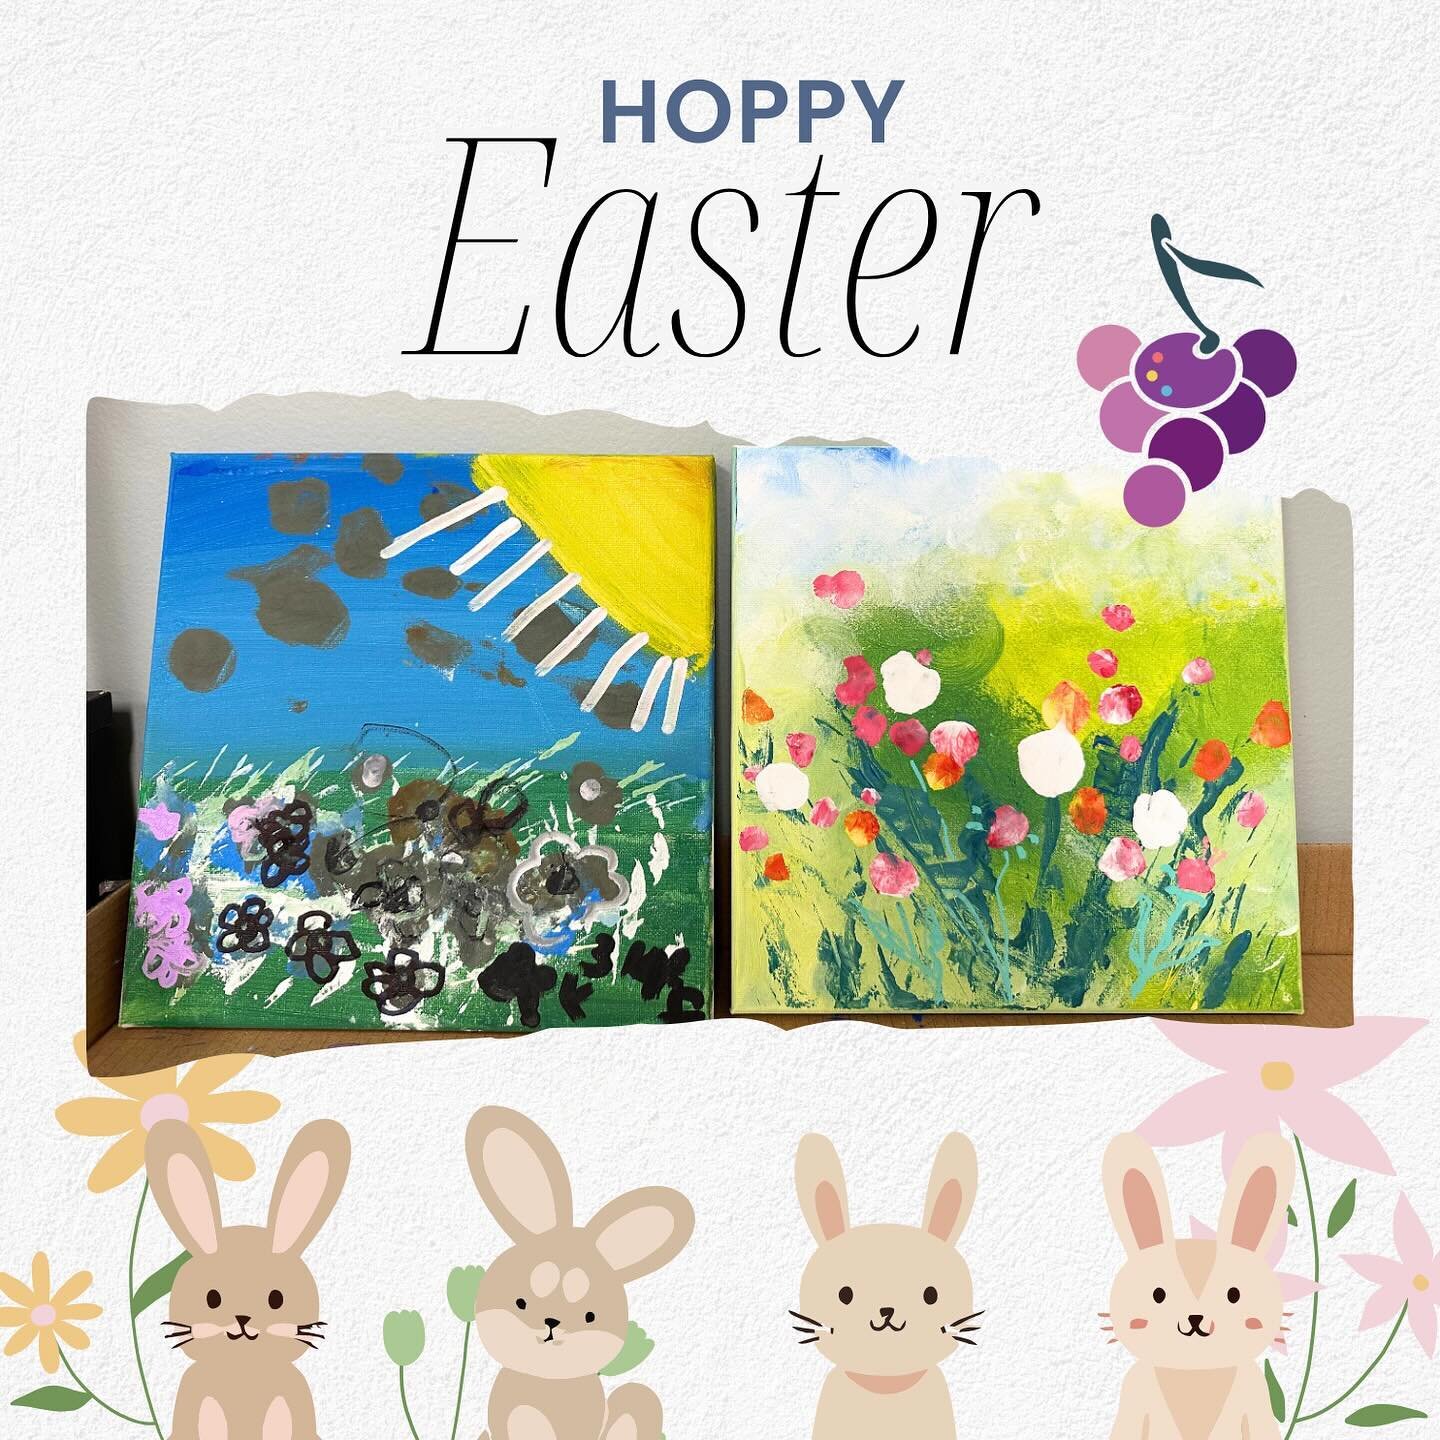 Hoppy Easter 🌷 Hope every bunny had a great day 🐰🐰🐰Hop, hop!